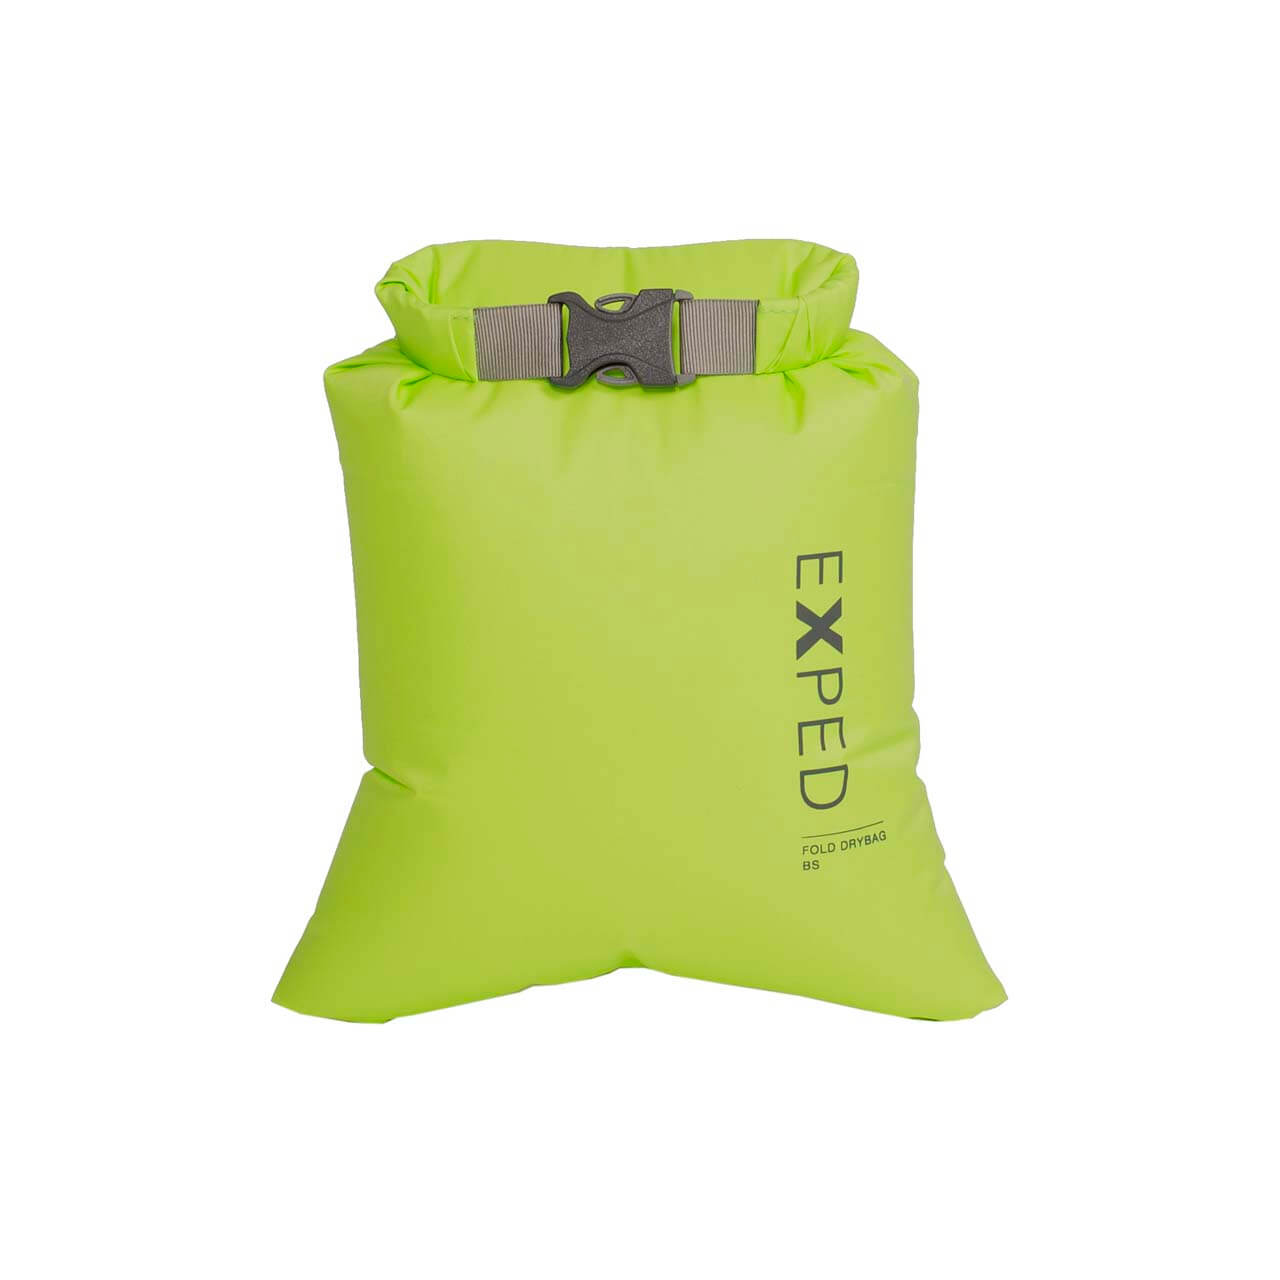 Exped Packsack Fold Drybag BS - Lime, XXS von Exped}